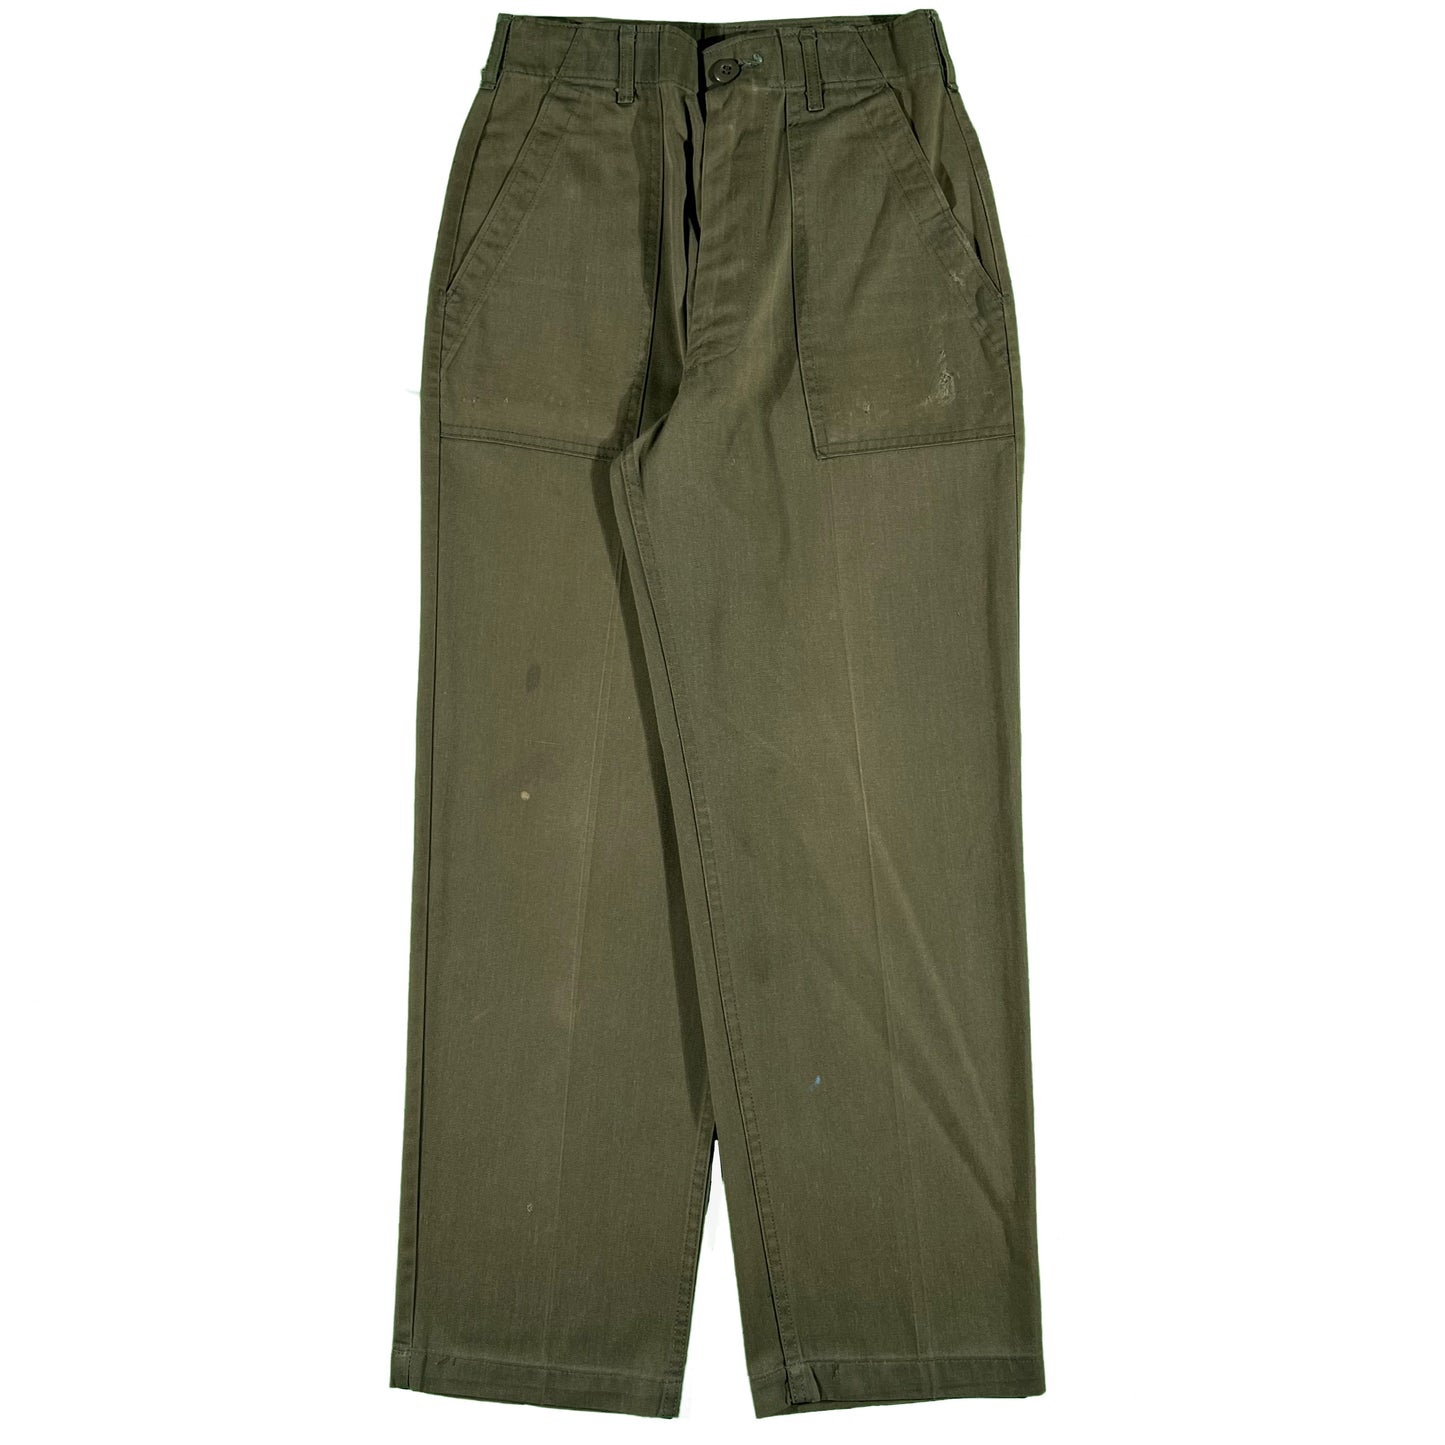 70s OG 507 Army Trousers- 26x28